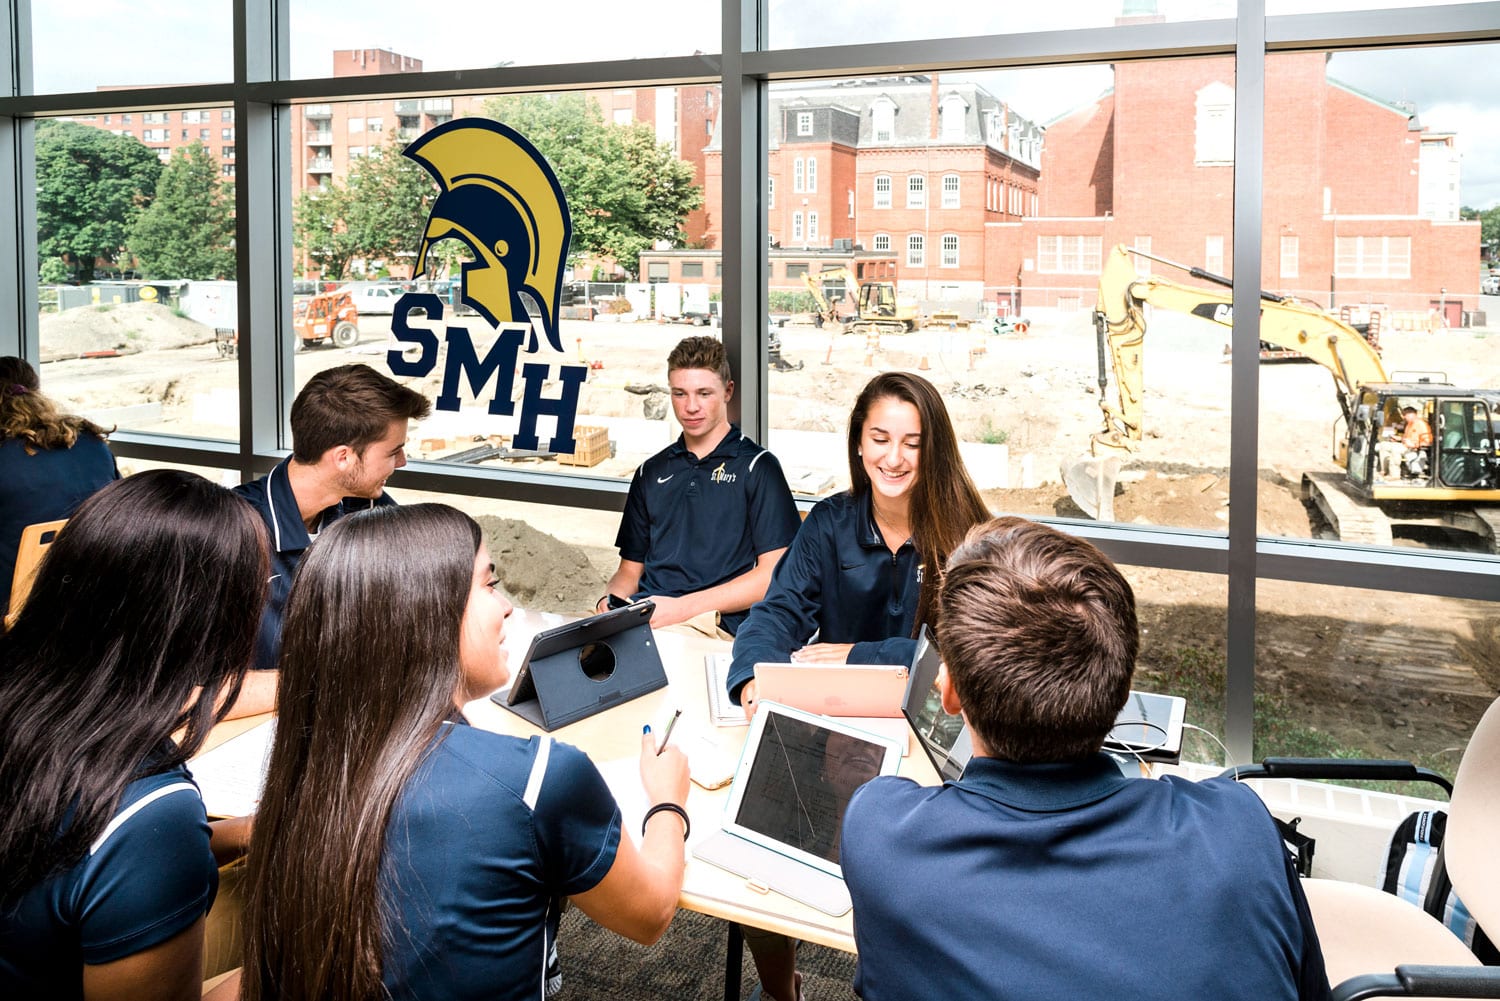 st-mary-s-enrollment-increases-as-campus-expands-itemlive-itemlive